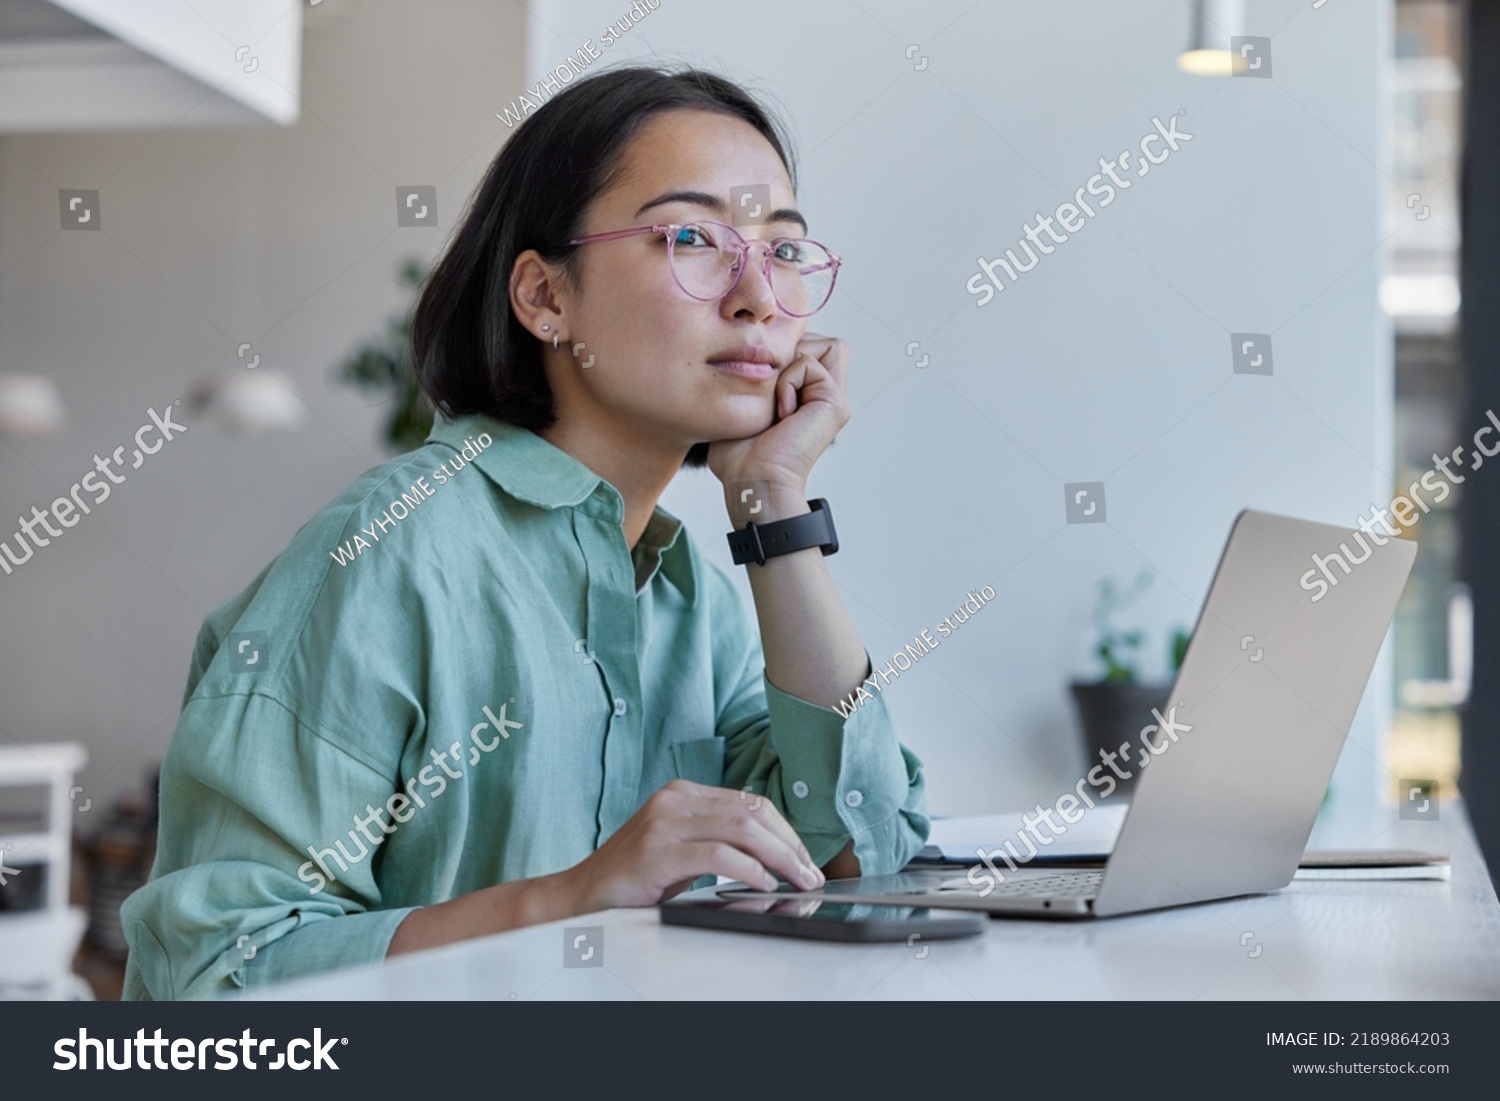 Thoughtful Asian woman works freelancer uses laptop computer smartphone has distance job poses against cozy interior indoors wears spectacles and shirt. Female digital nomad enjoys modern lifestyle #2189864203